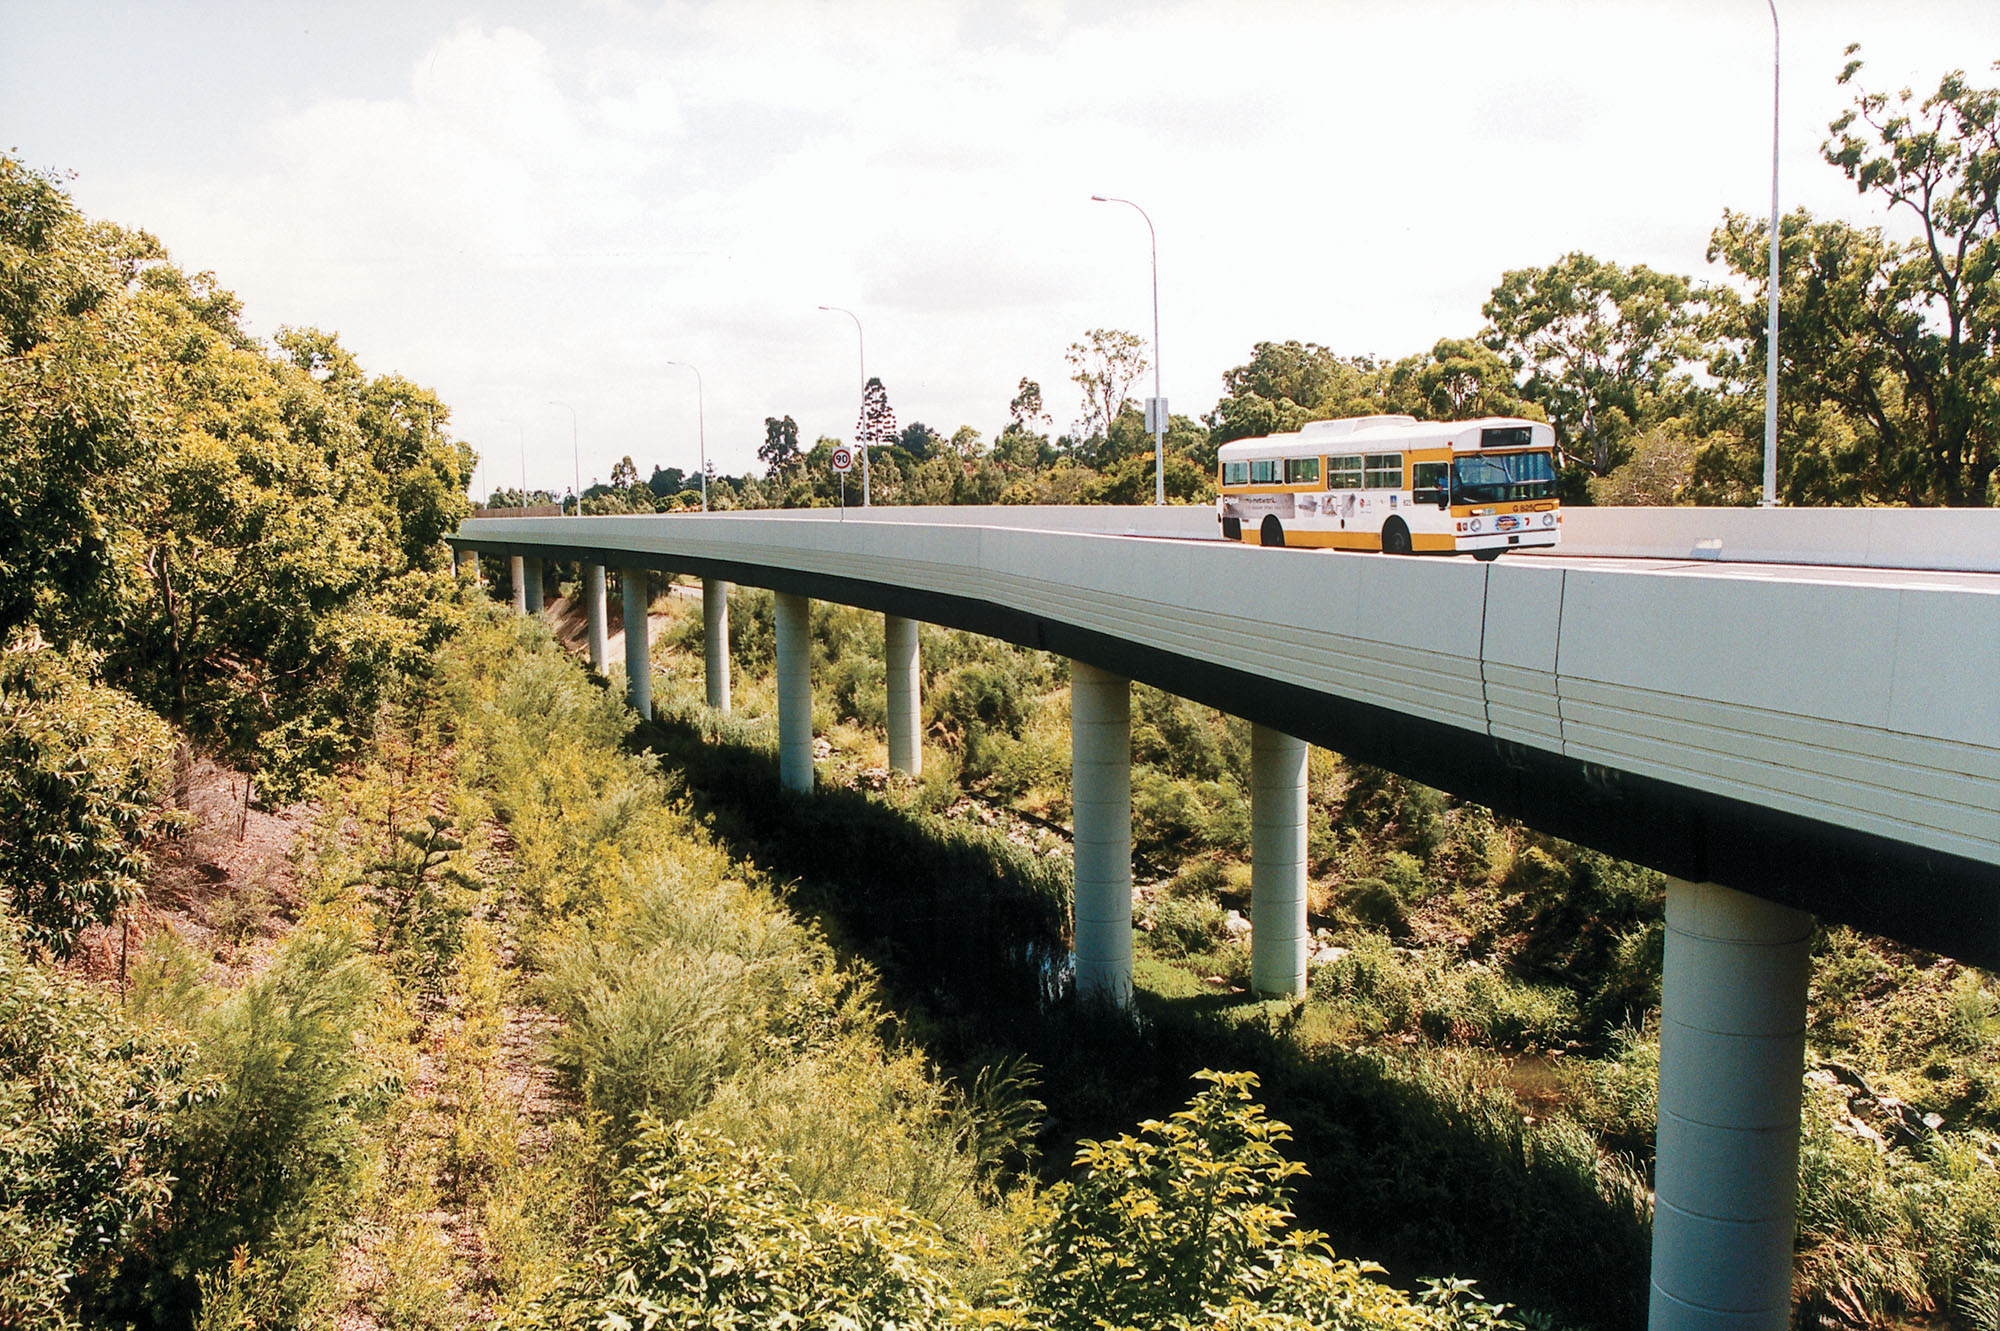 Fig. 22.31 An elevated busway in Brisbane, Australia, allows the system to maneuver through a sensitive greenway.